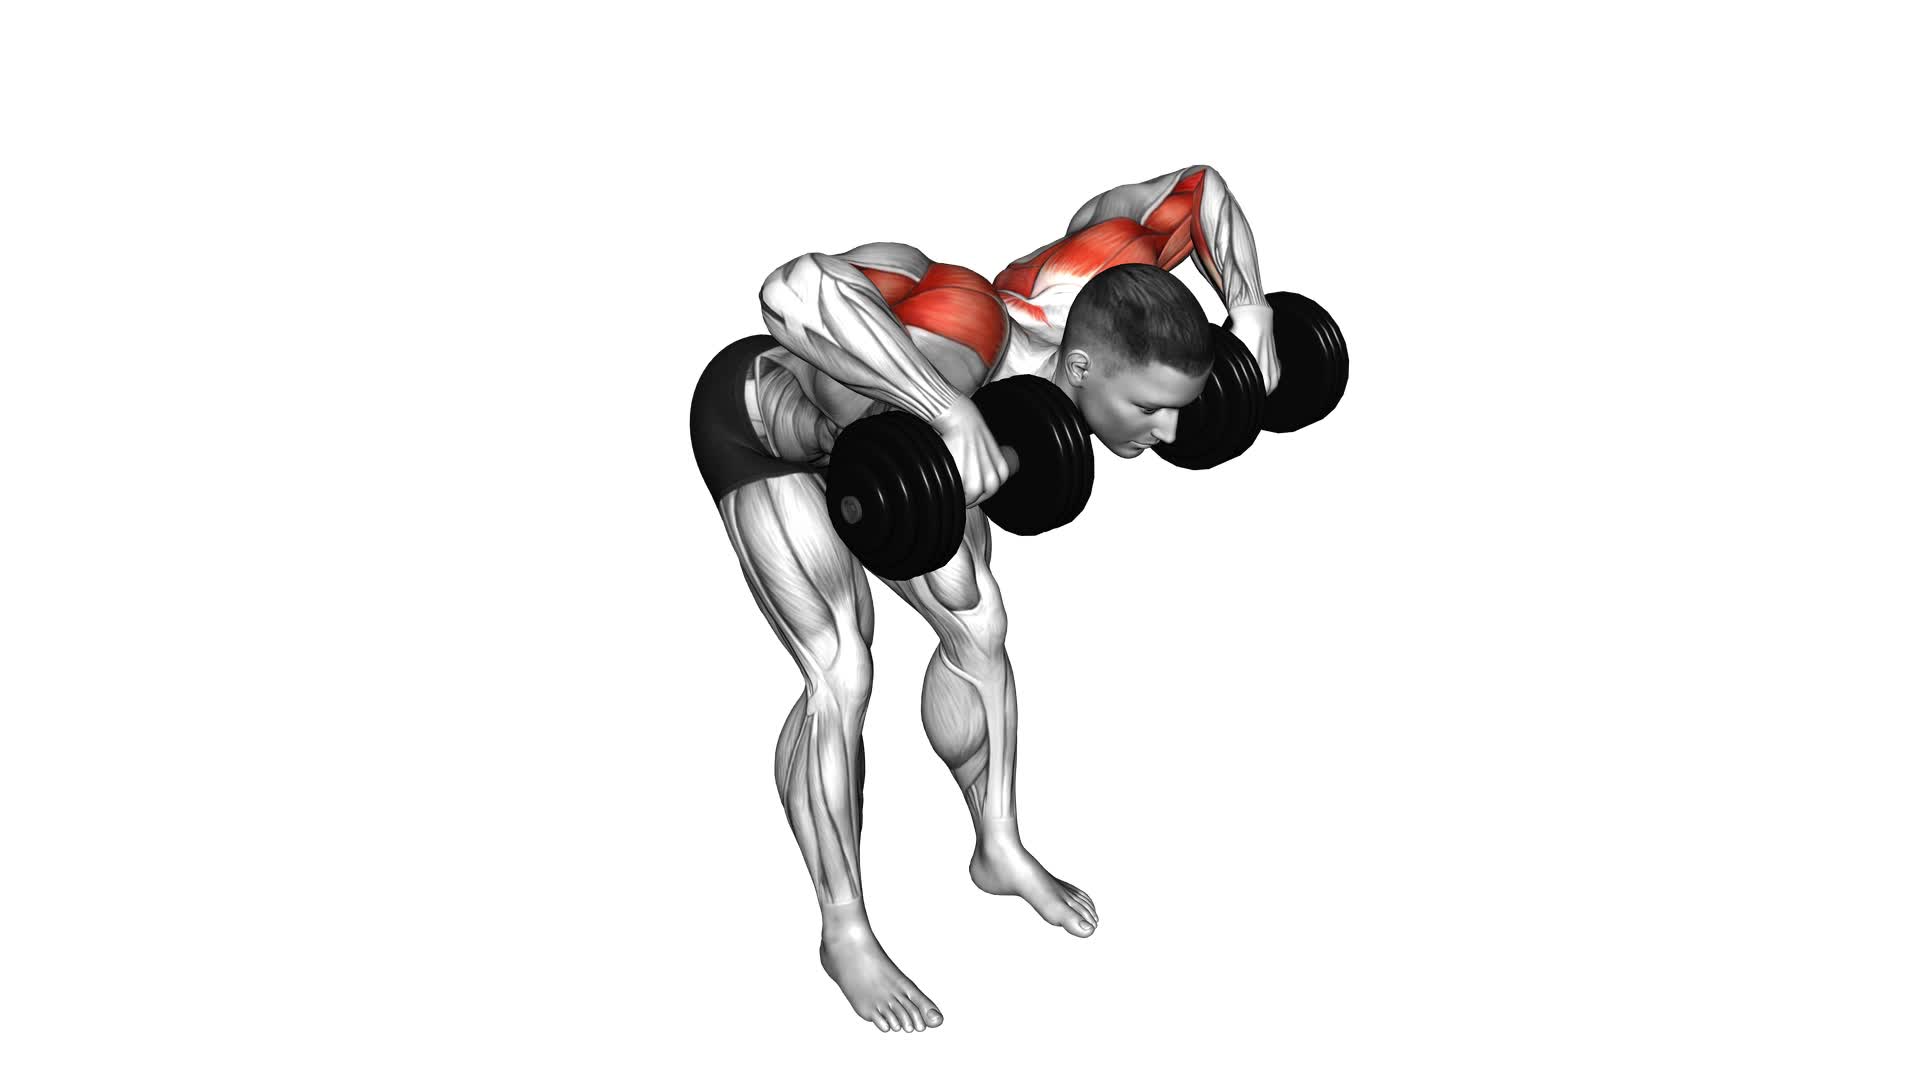 Dumbbell Bent Over Face Pull - Video Exercise Guide & Tips